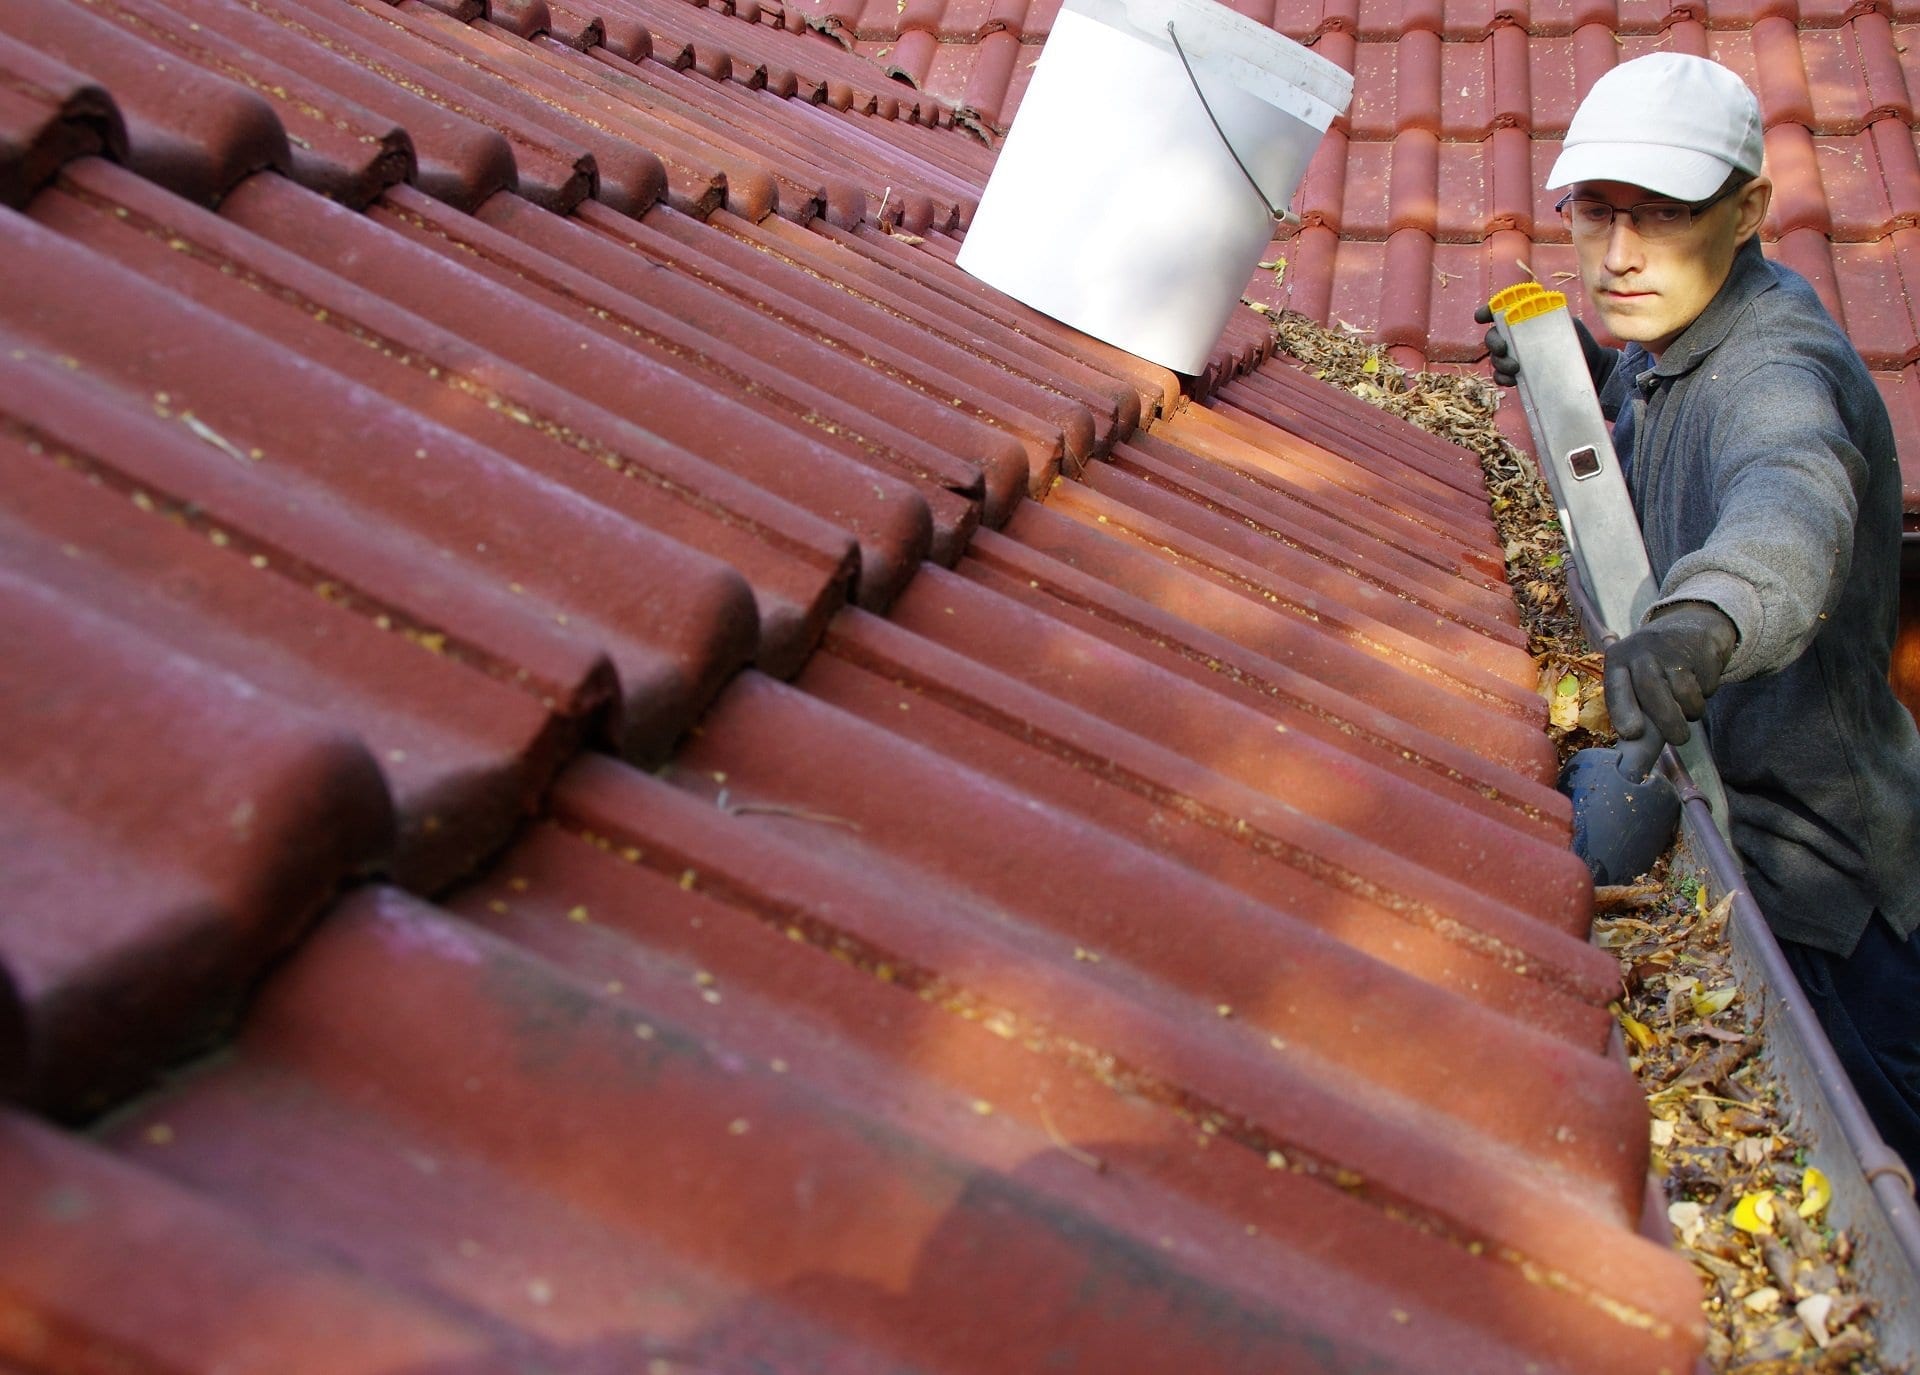 residental-roof-repair-gutter-cleaning-tips-calgary-claw-roofing